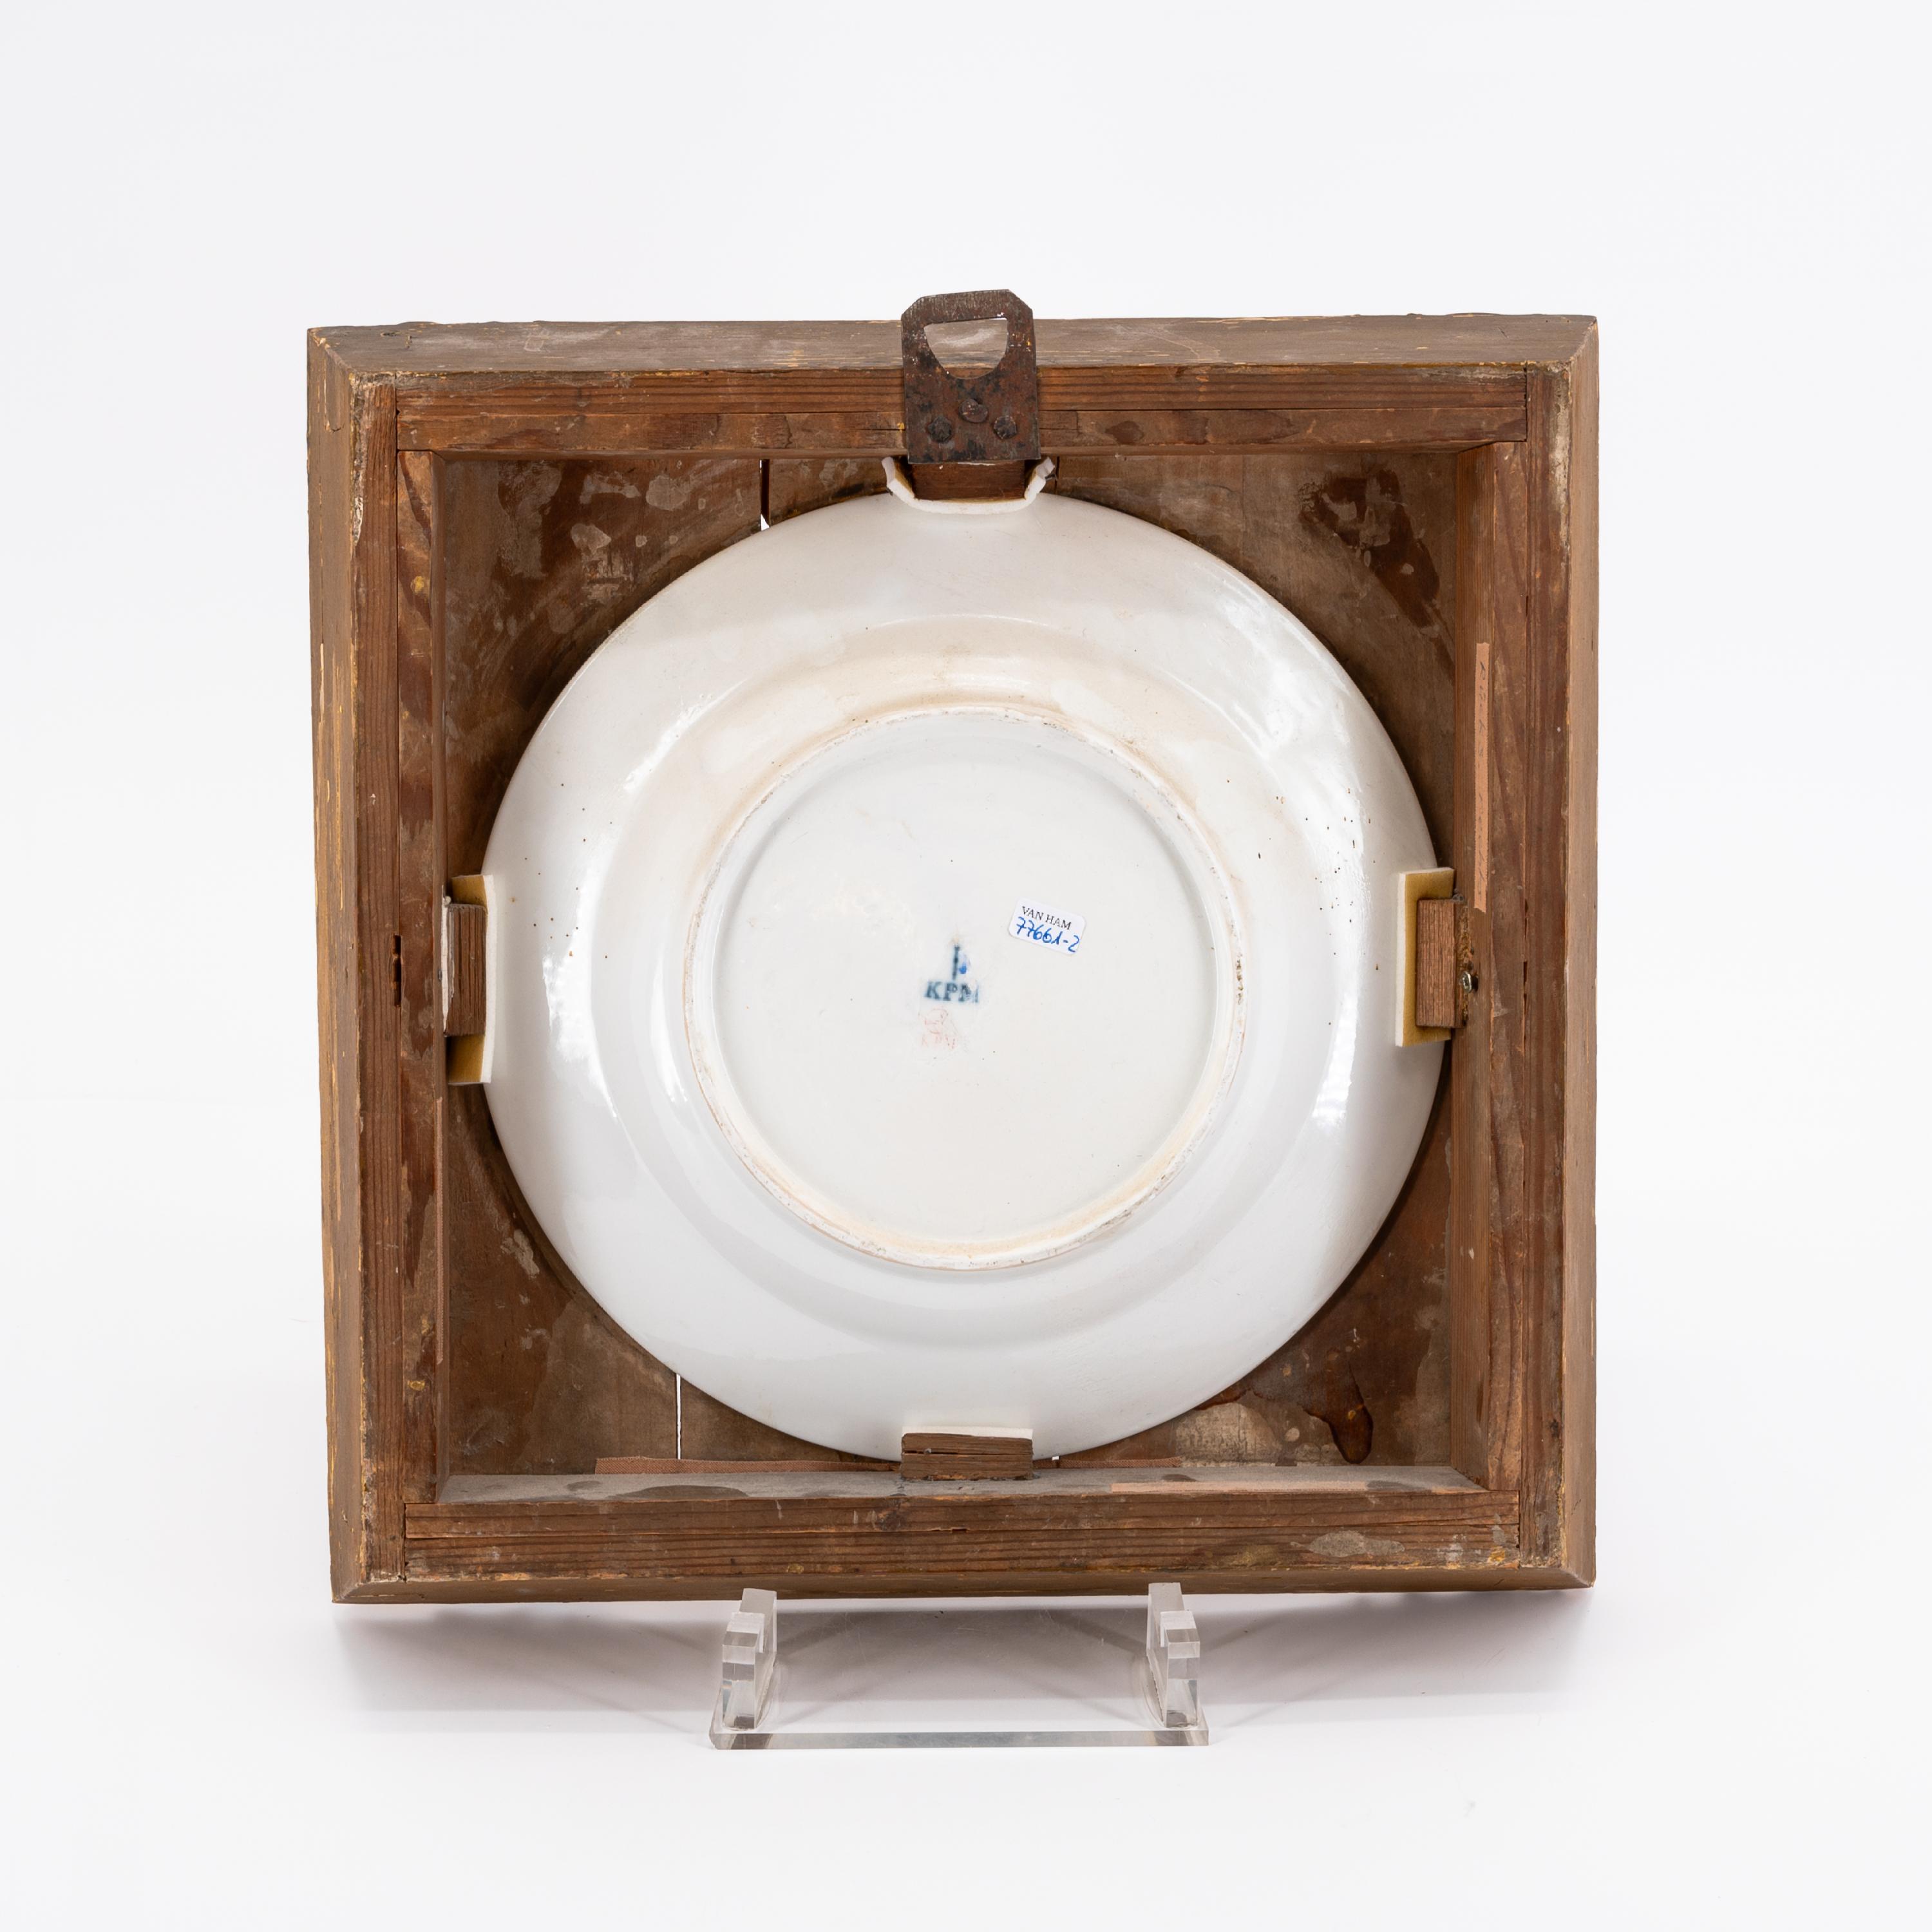 EXEPTIONAL SERIES OF TWELVE PORCELAIN PLATES WITH ROMANTIC VIEWS OF THE RHINE - Image 12 of 26